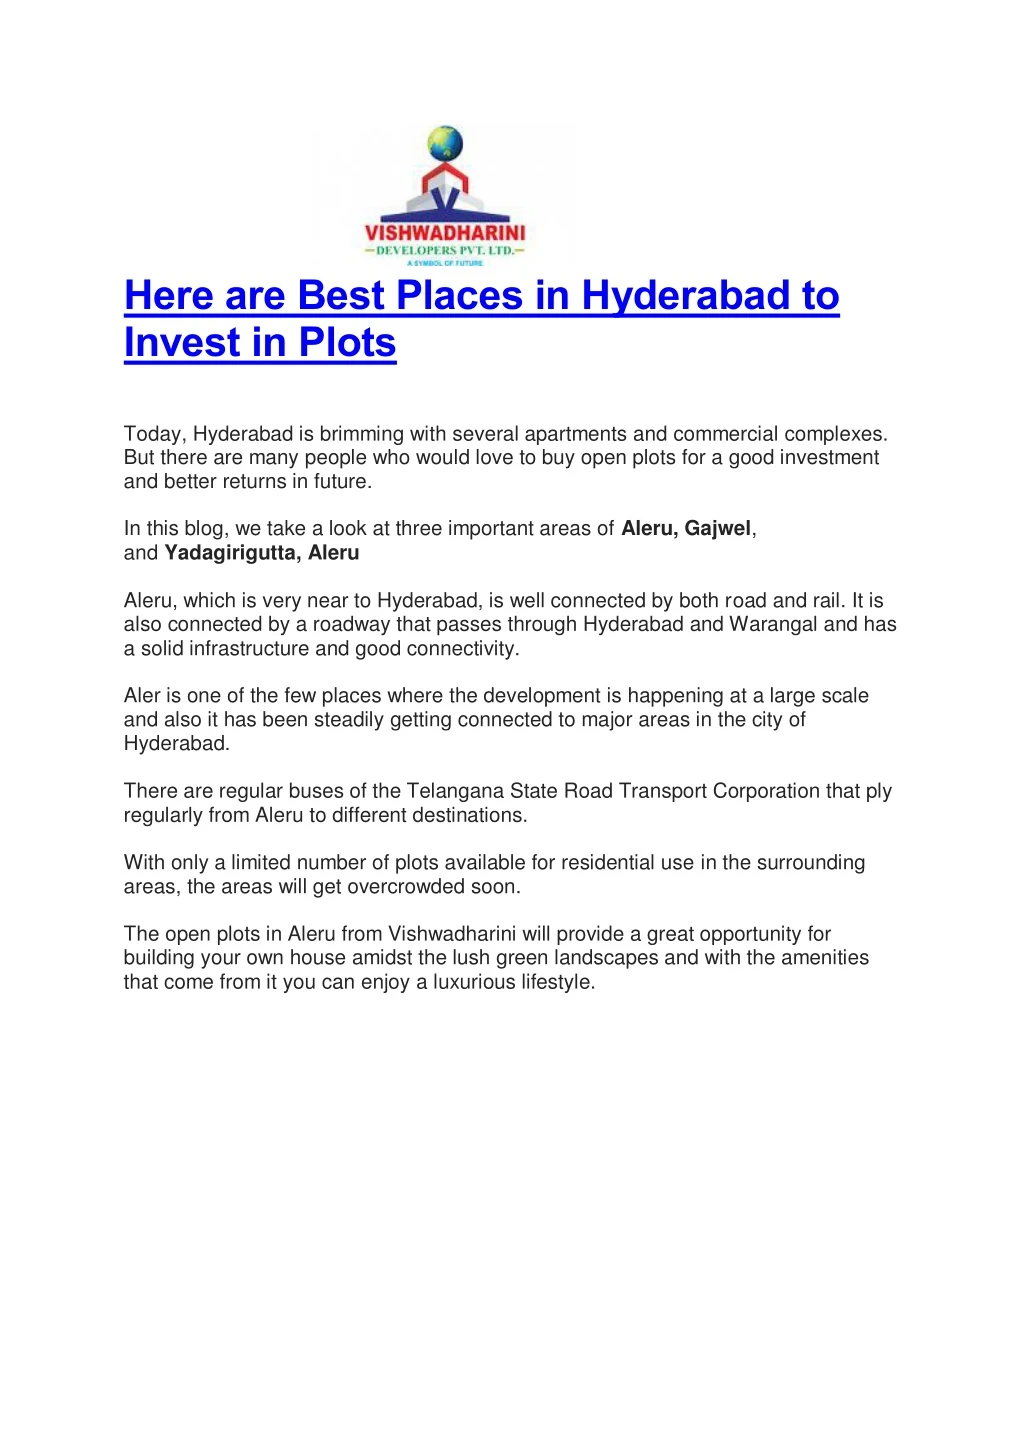 here are best places in hyderabad to invest